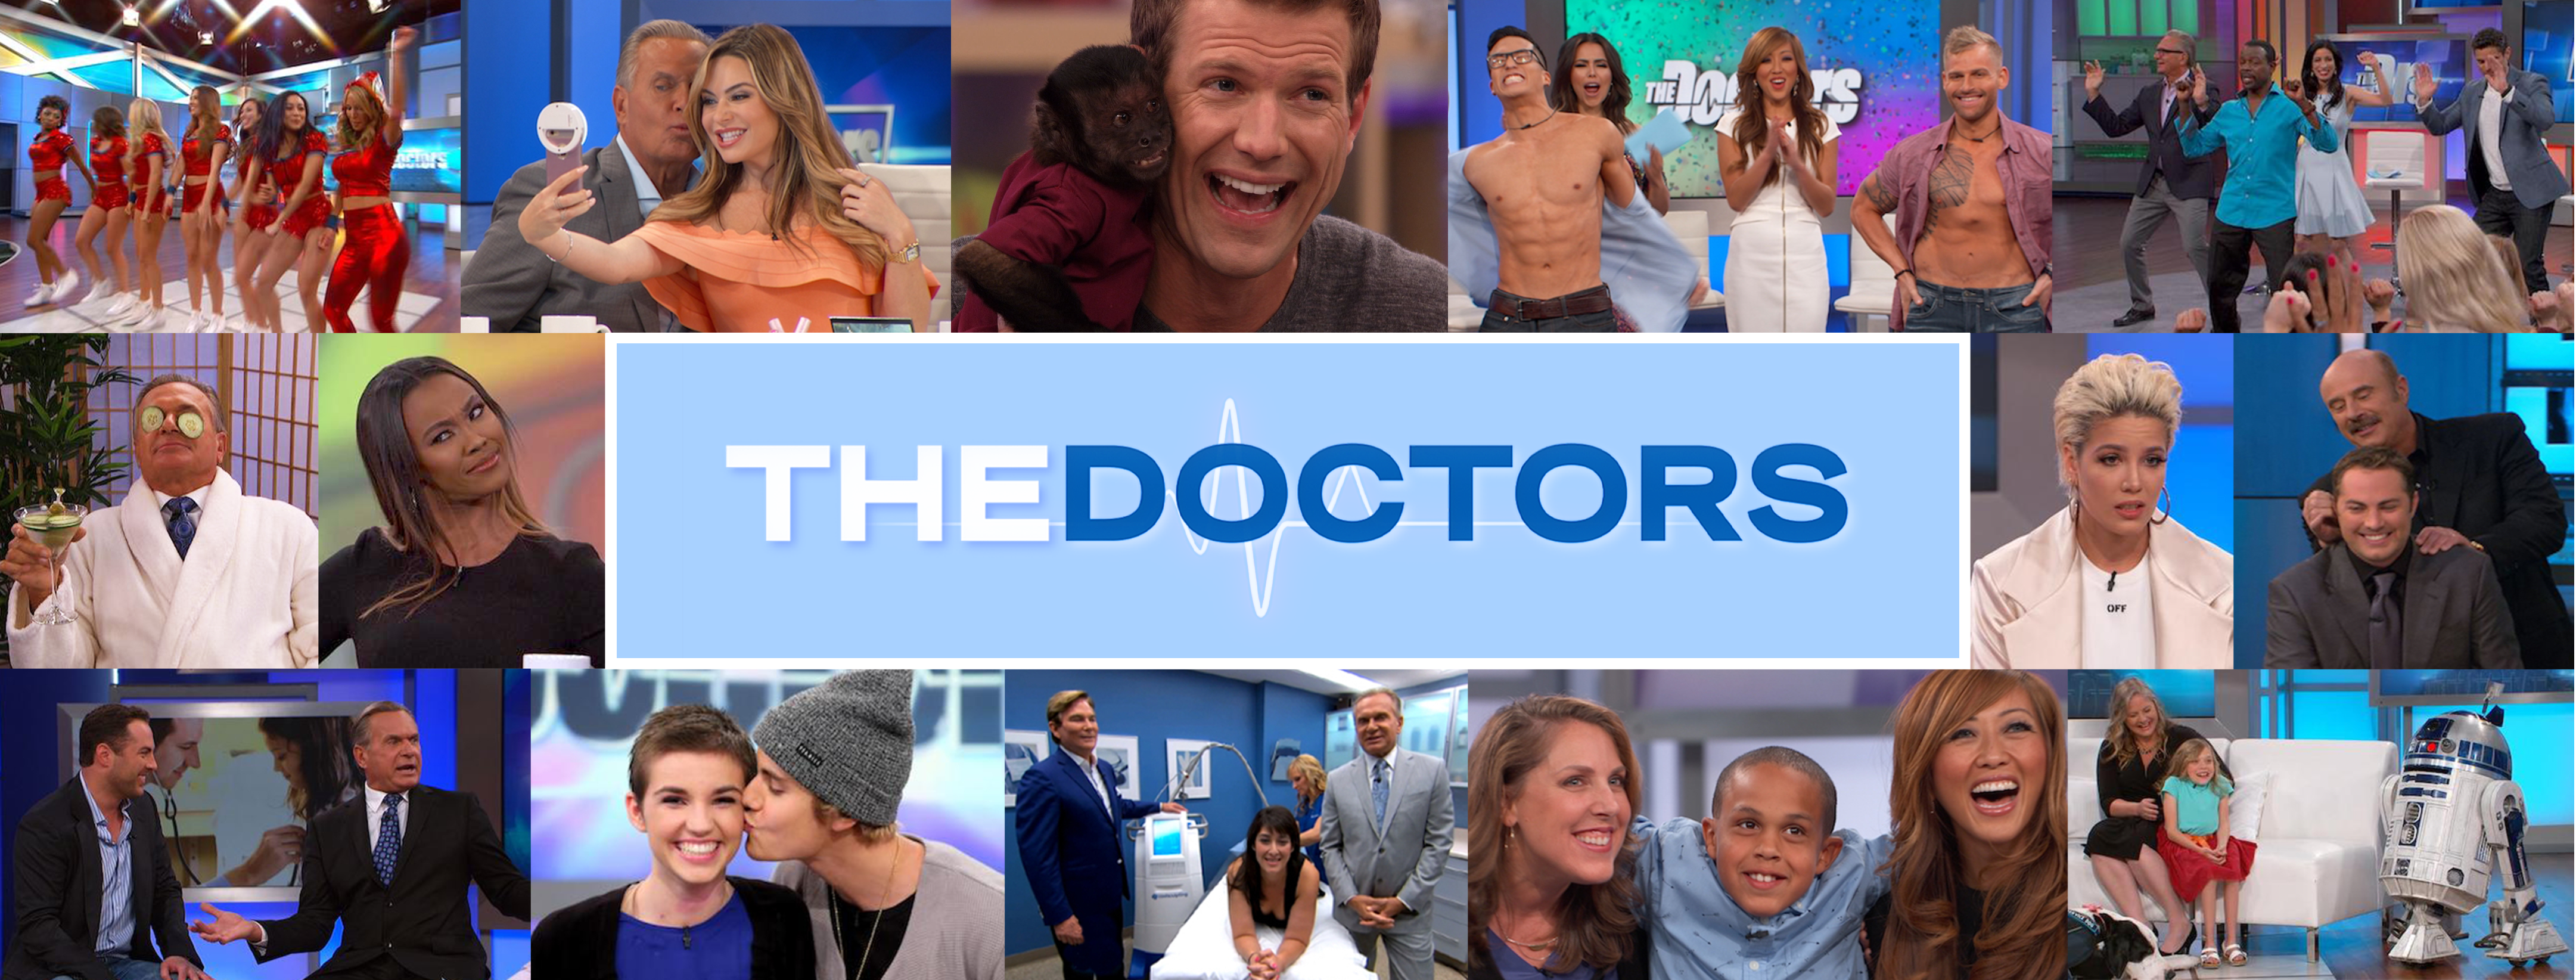 Body Fluids Exposed | The Doctors TV Show